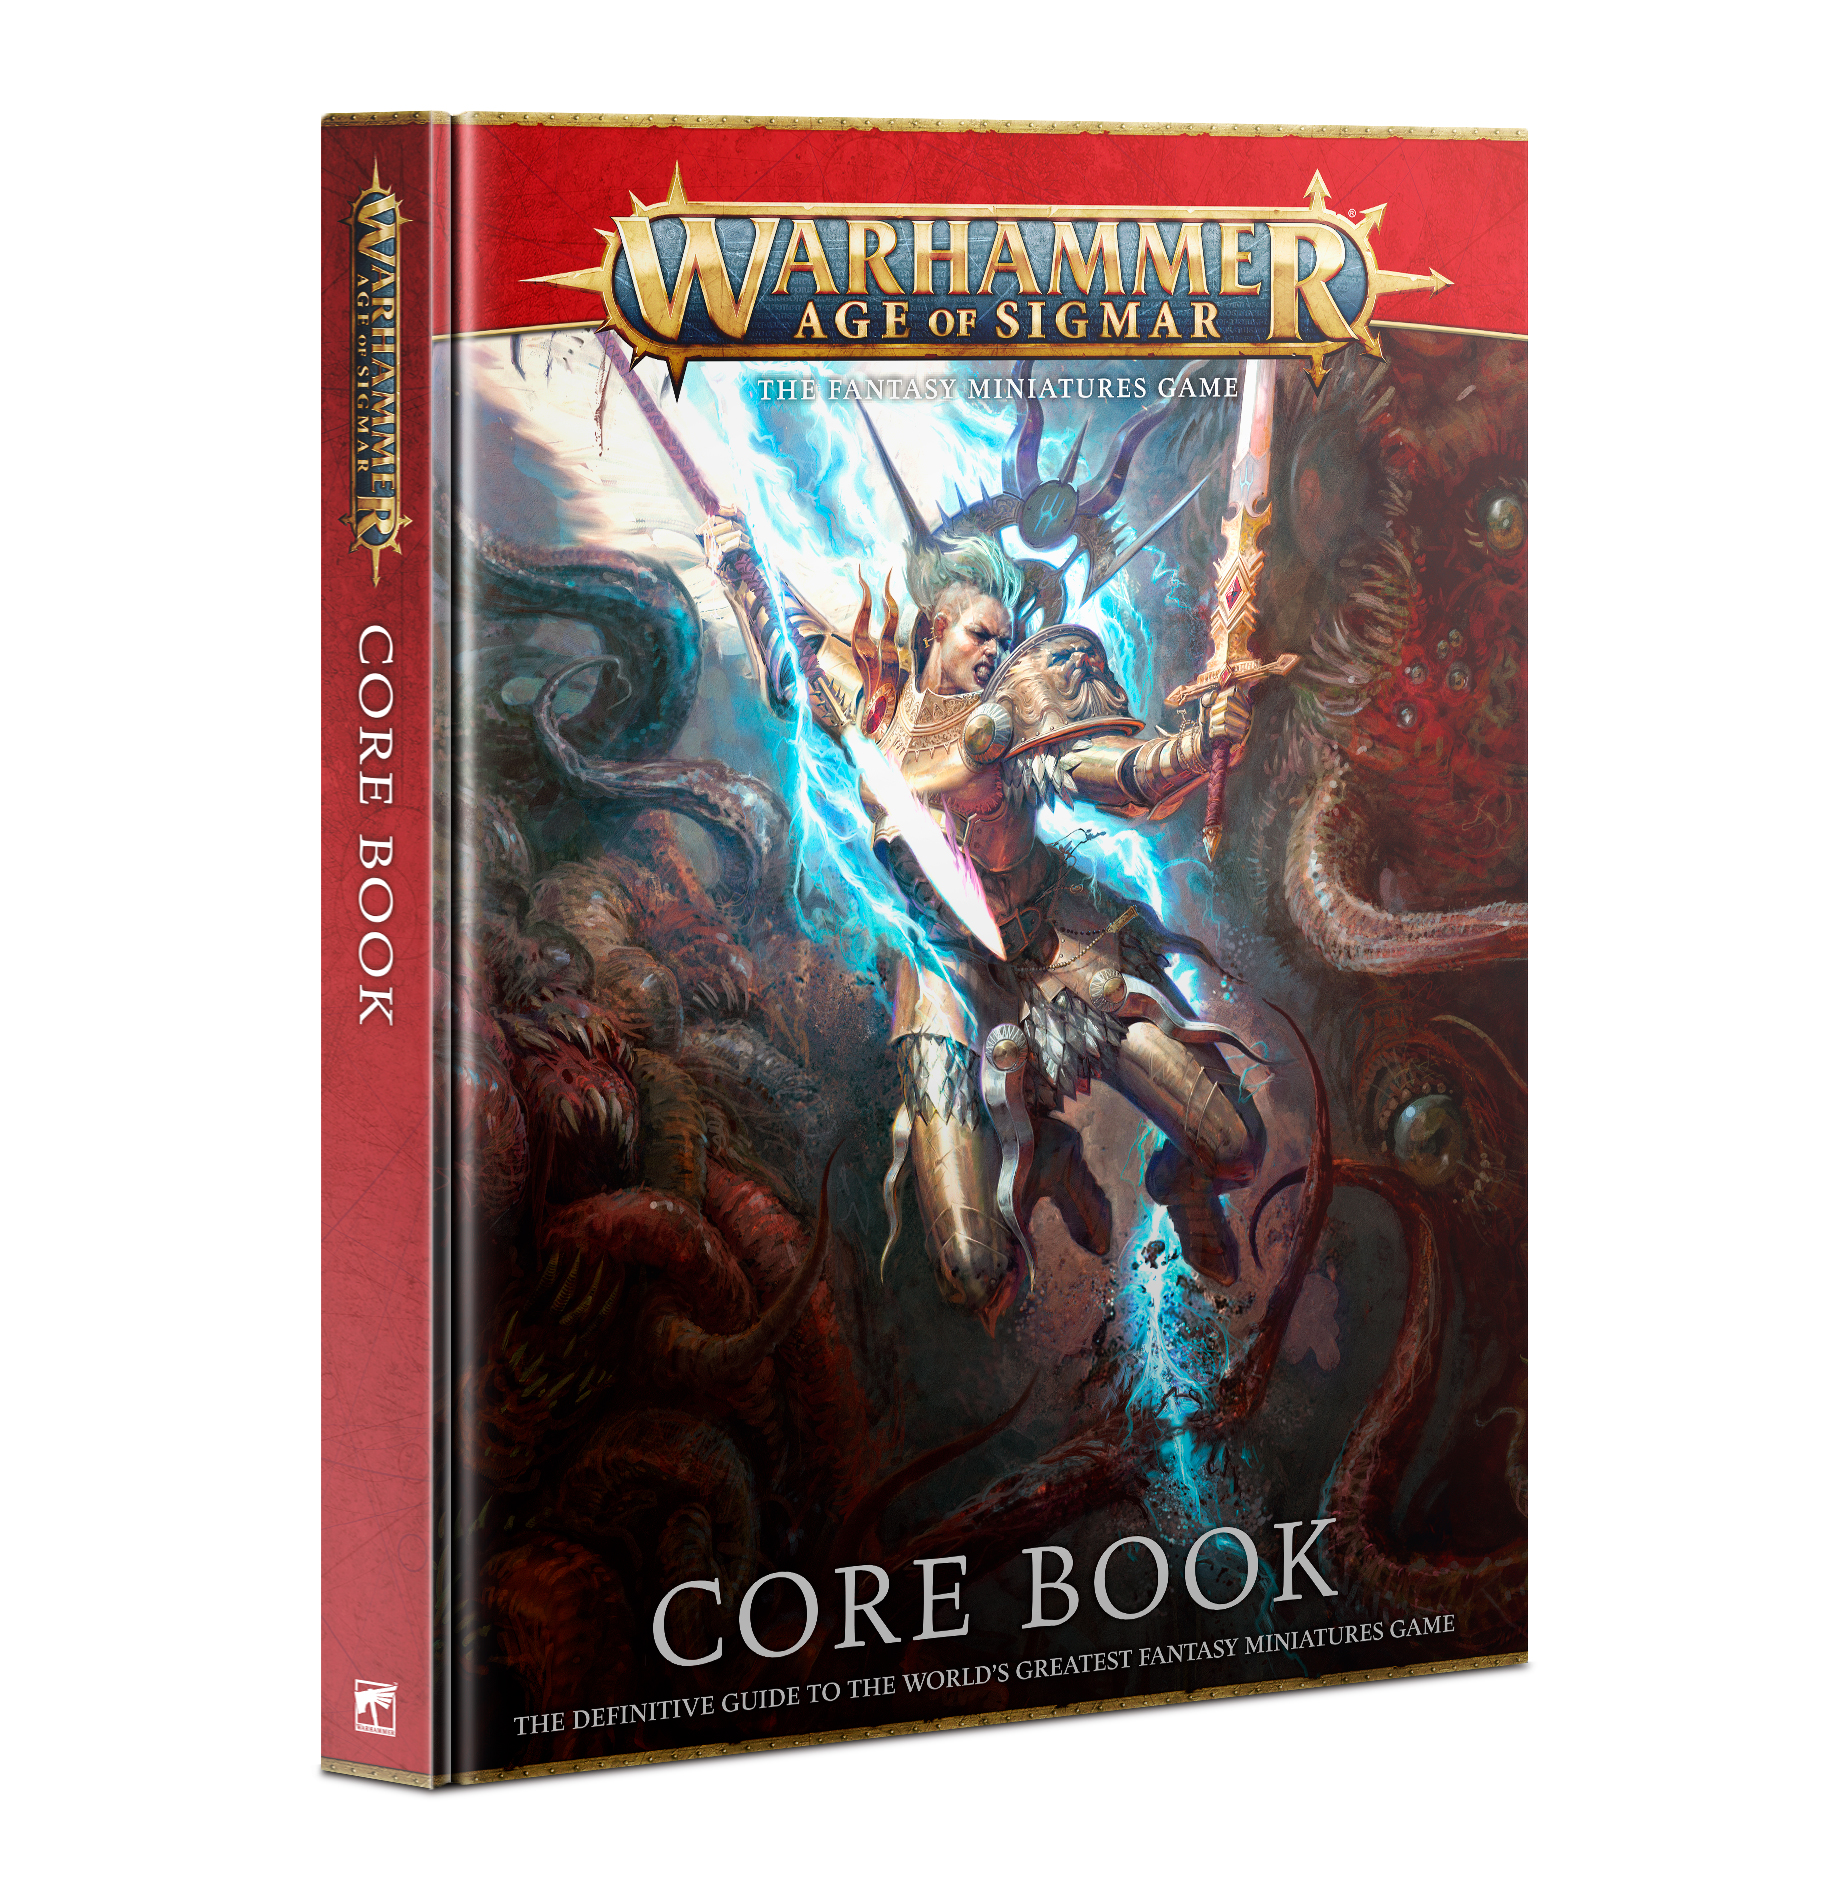 Warhammer: Age of Sigmar Core Rules Book